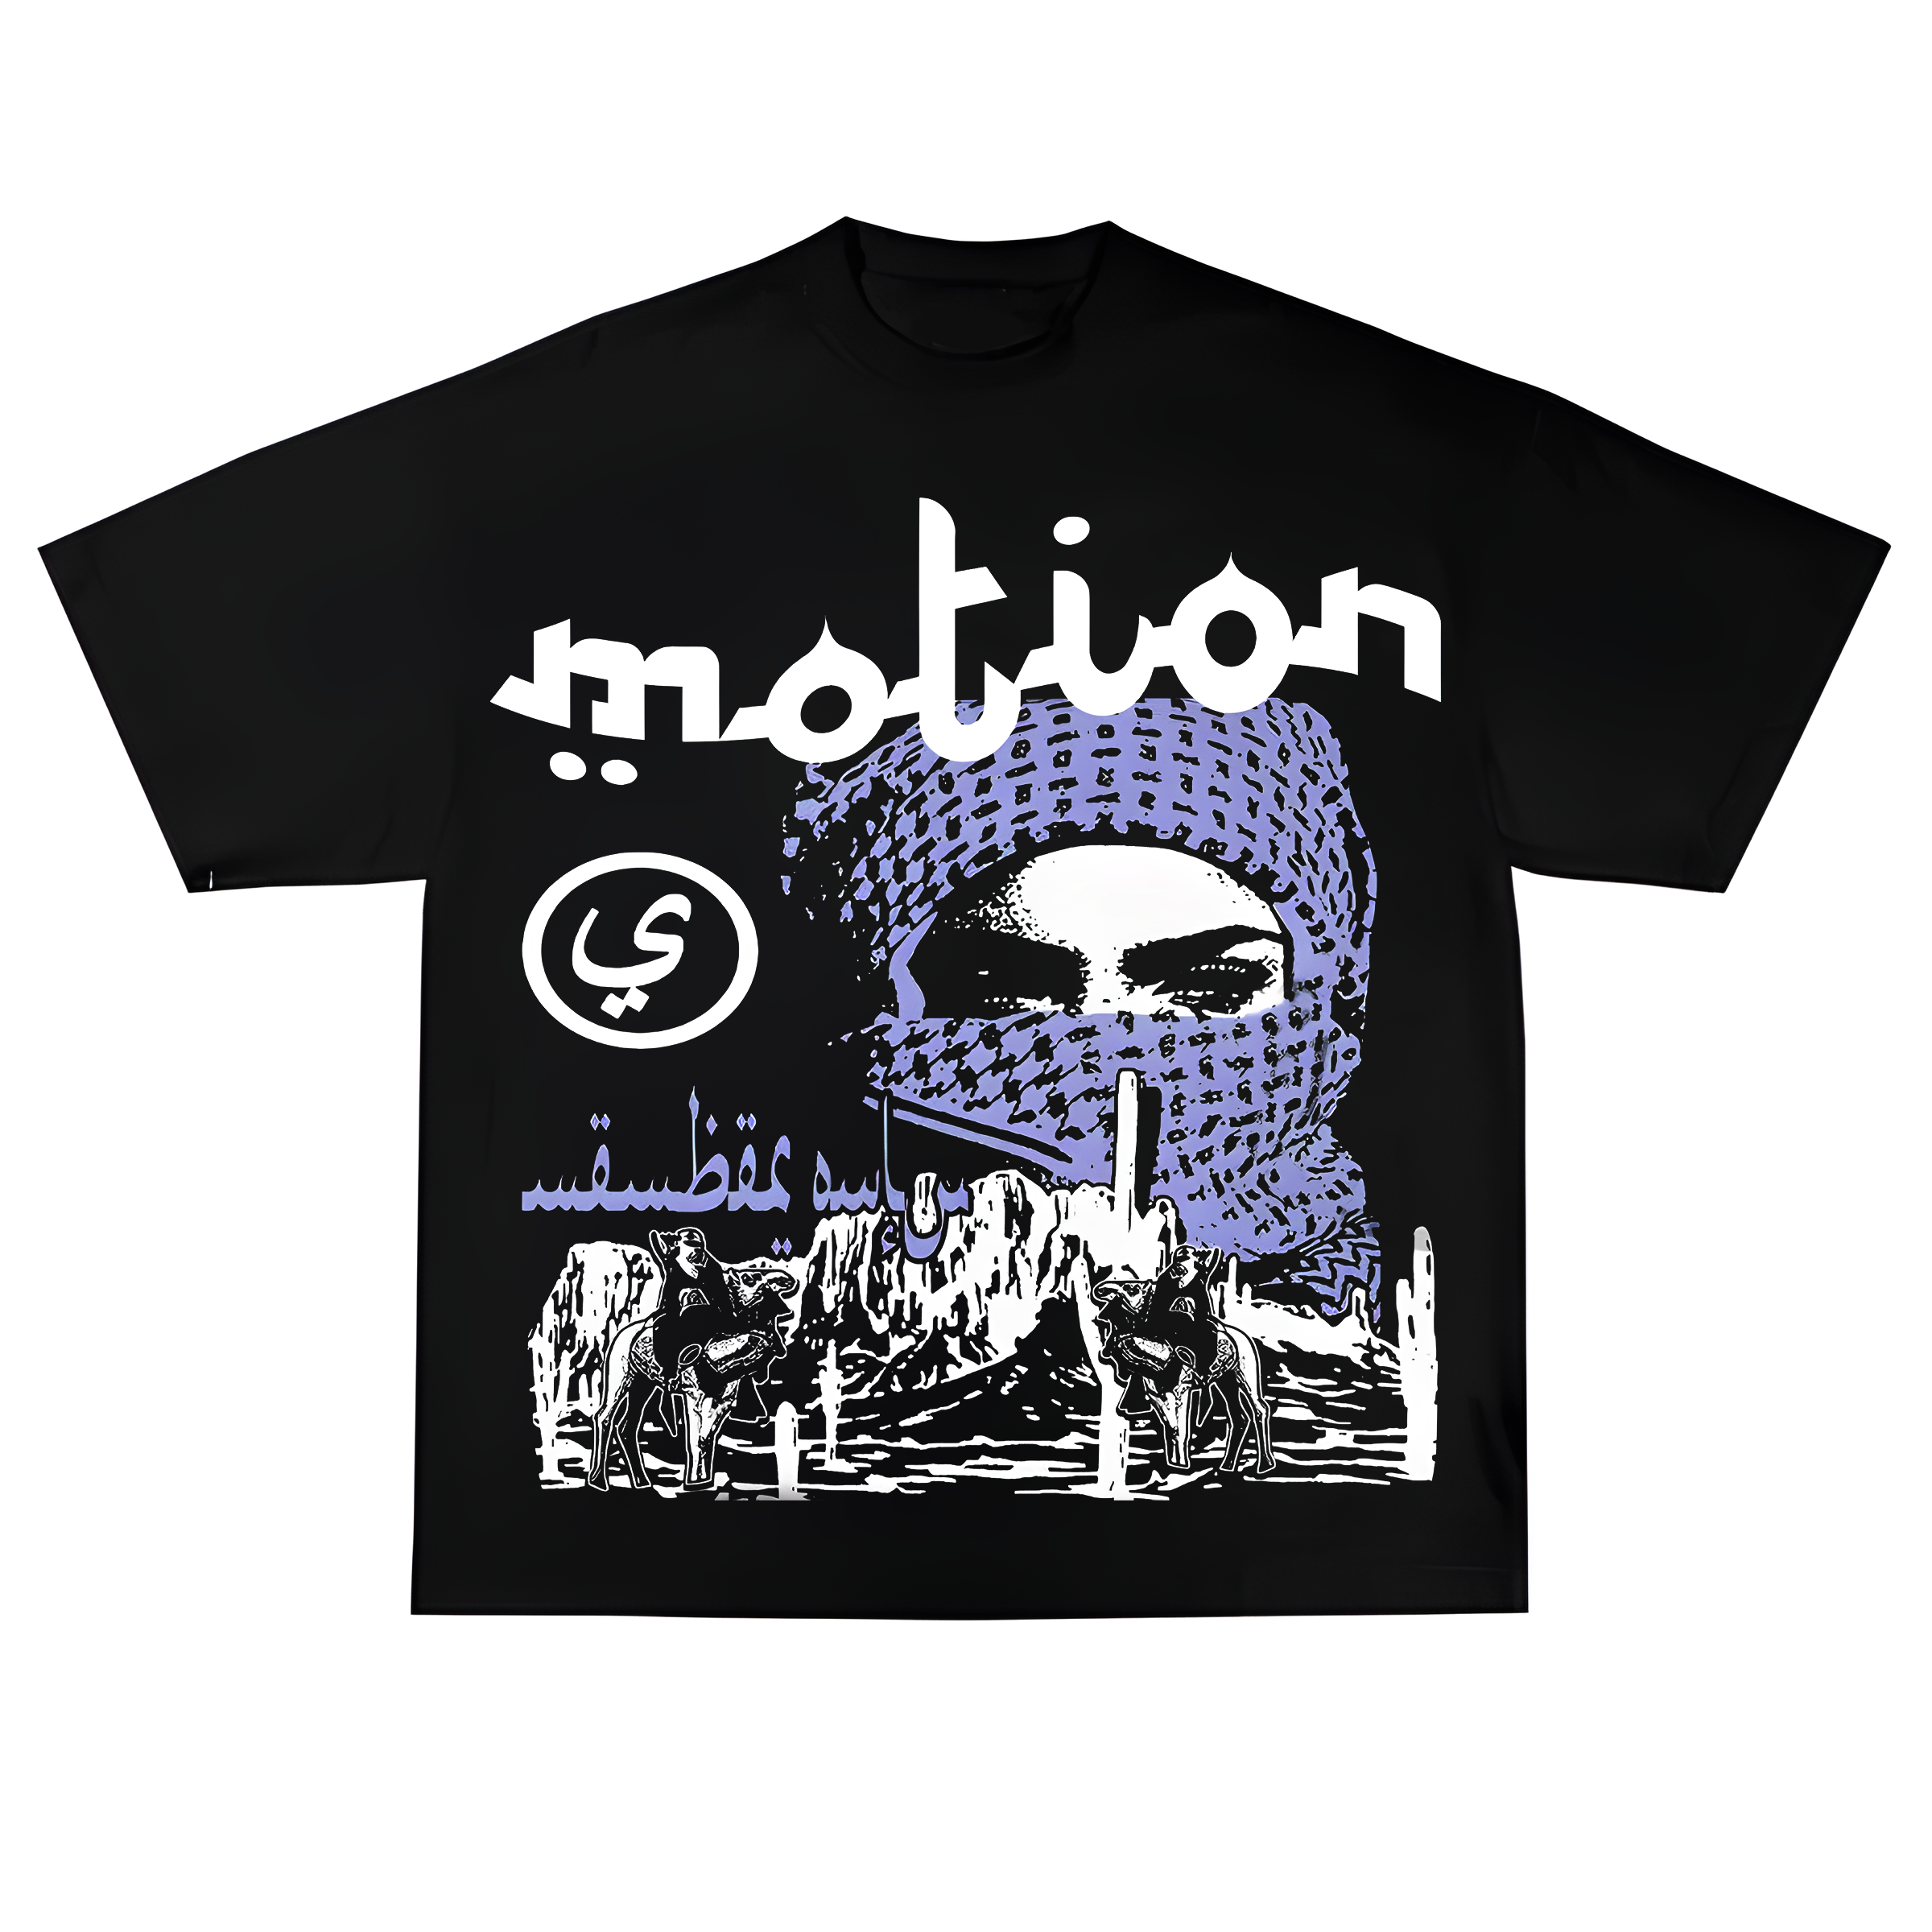 'MOTION' GRAPHIC TEE